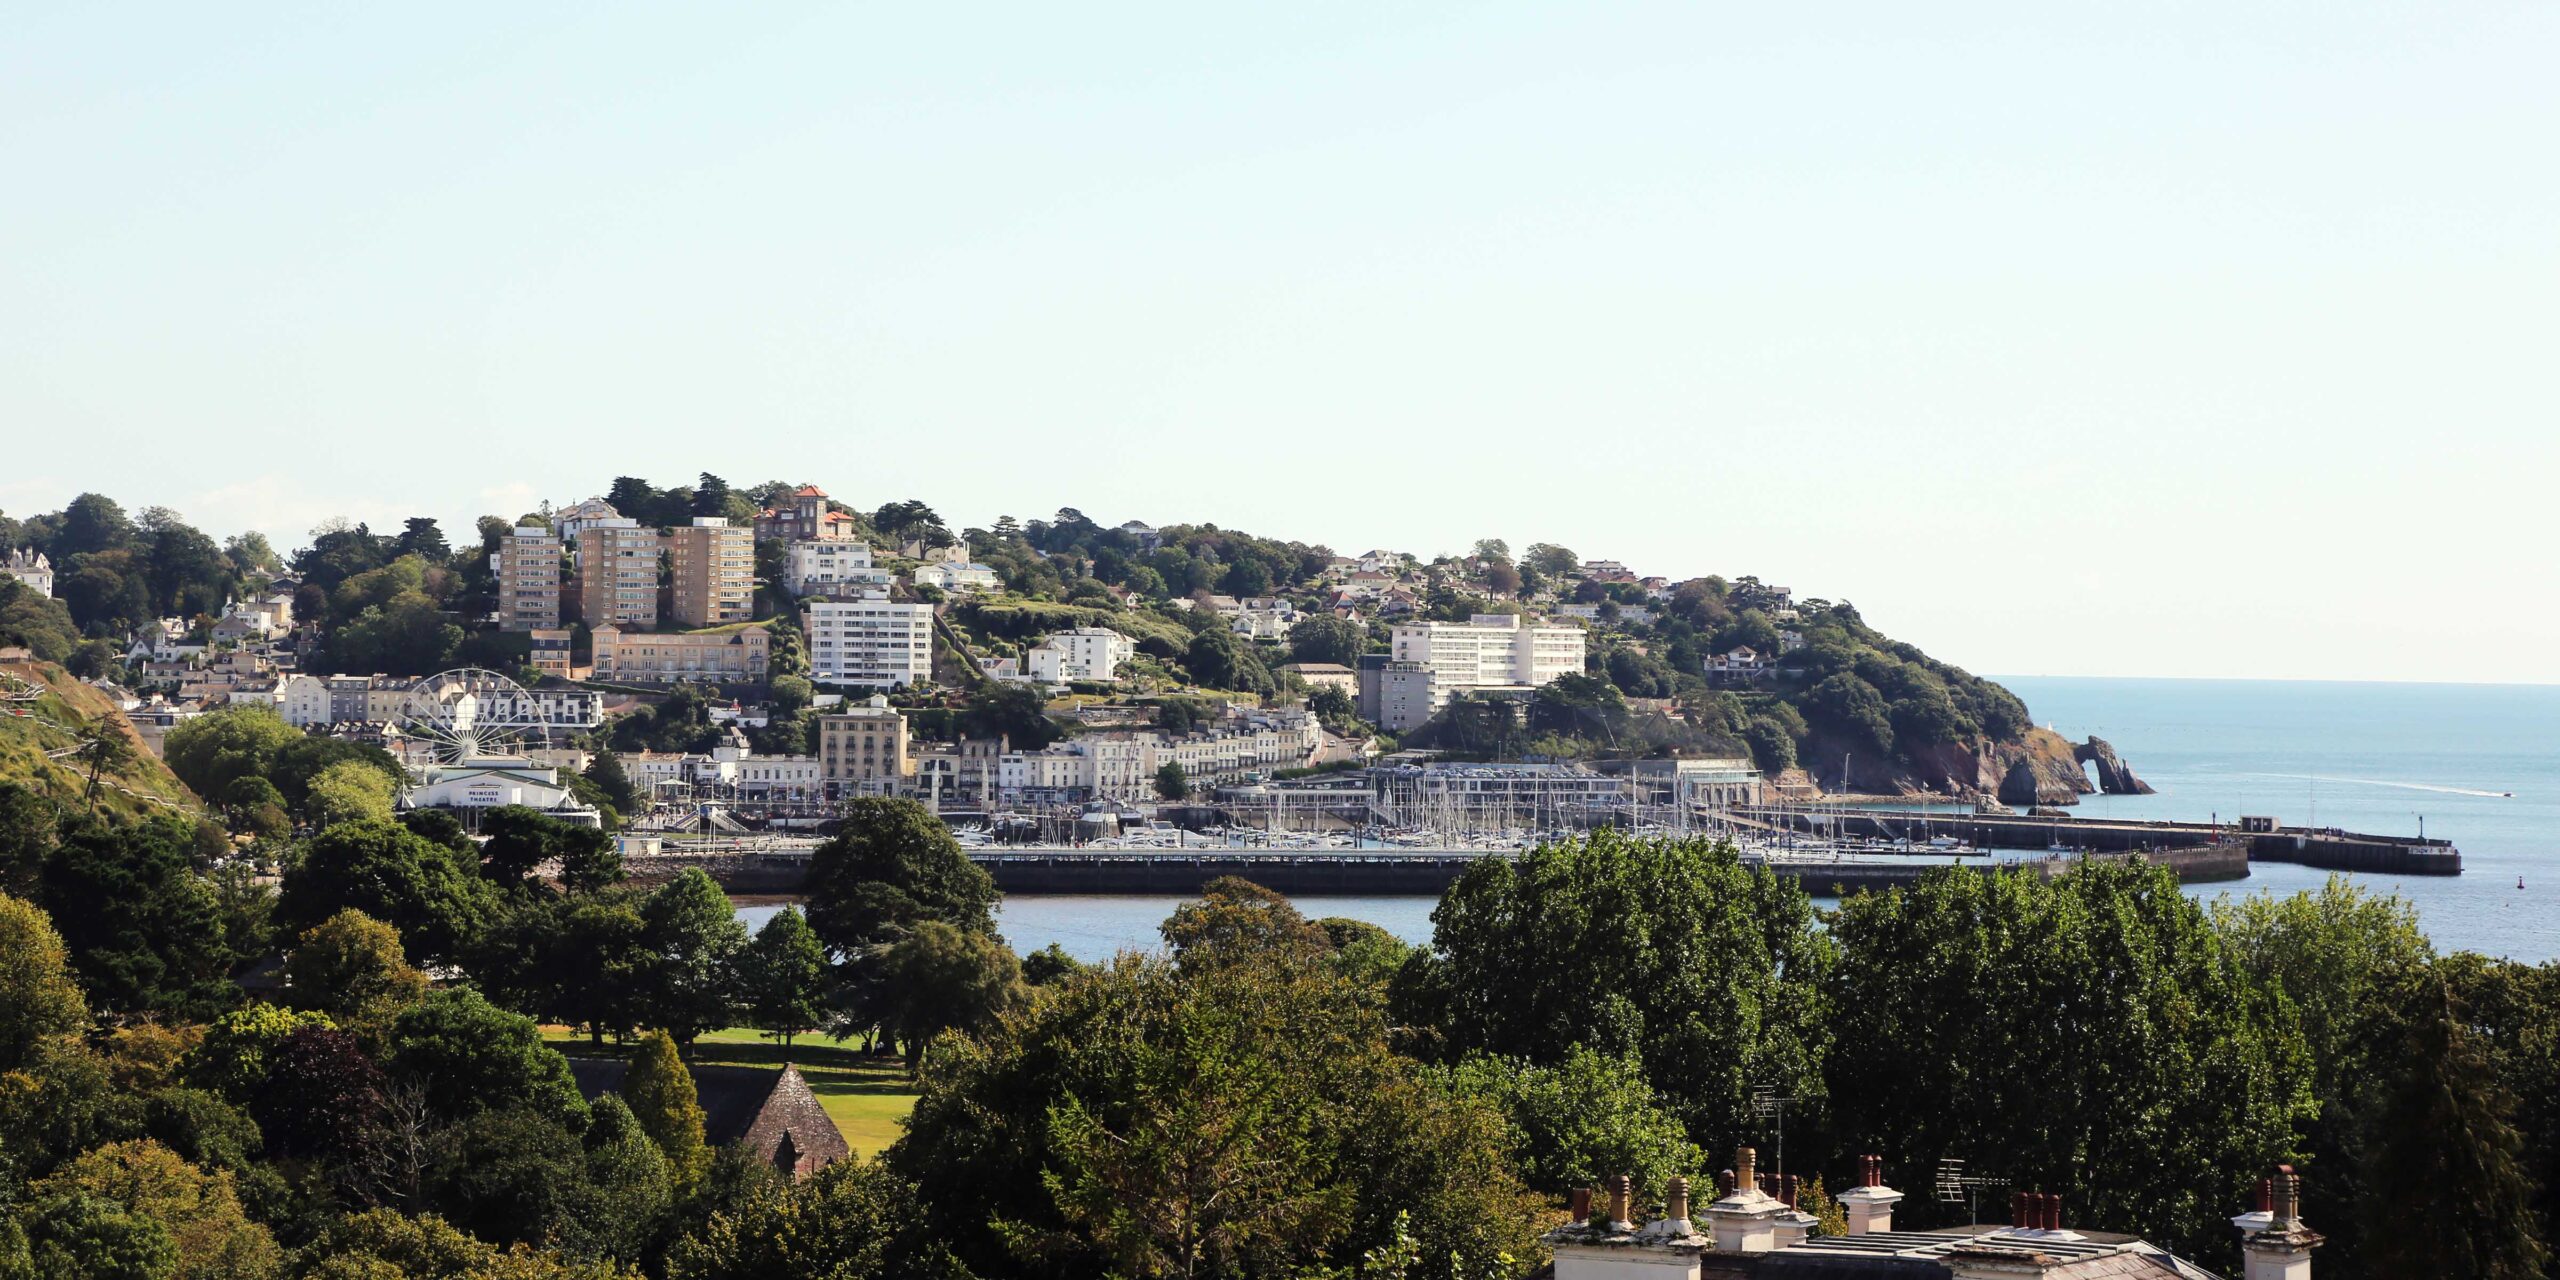  Torquay View - kate & tom's Large Holiday Homes